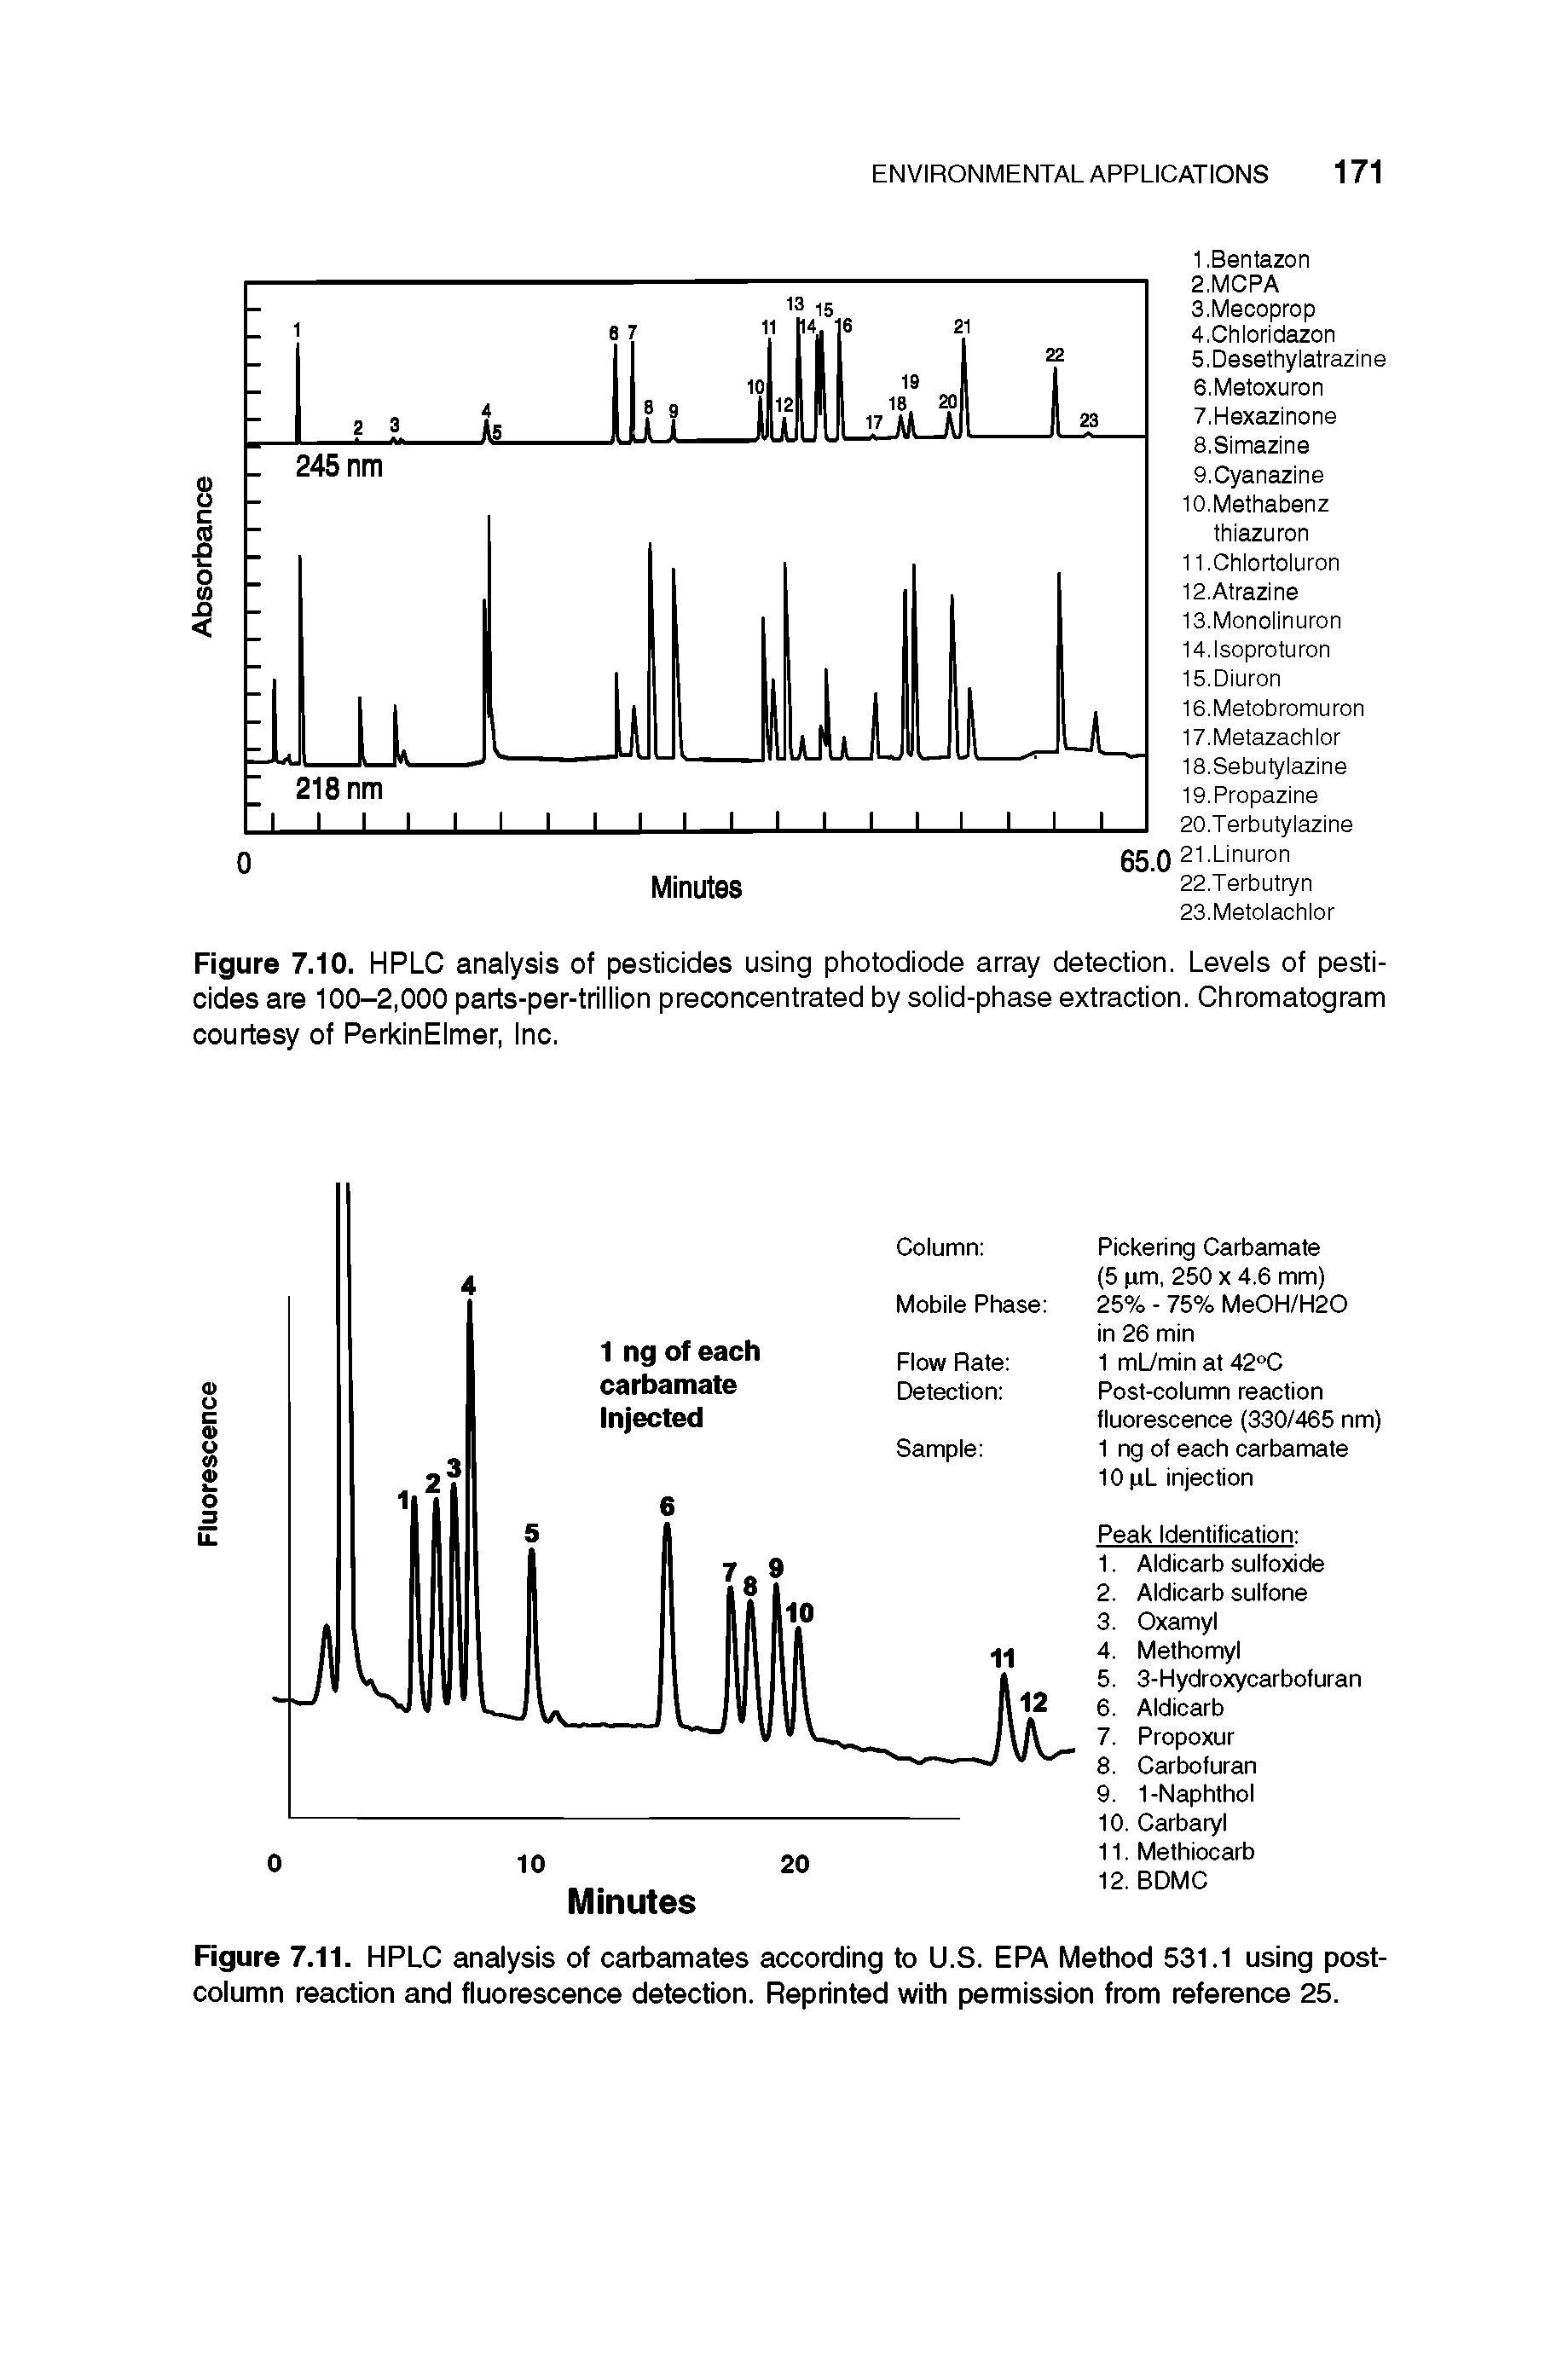 Figure 7.10. HPLC analysis of pesticides using photodiode array detection. Levels of pesticides are 100-2,000 parts-per-trillion preconcentrated by solid-phase extraction. Chromatogram courtesy of PerkinElmer, Inc.